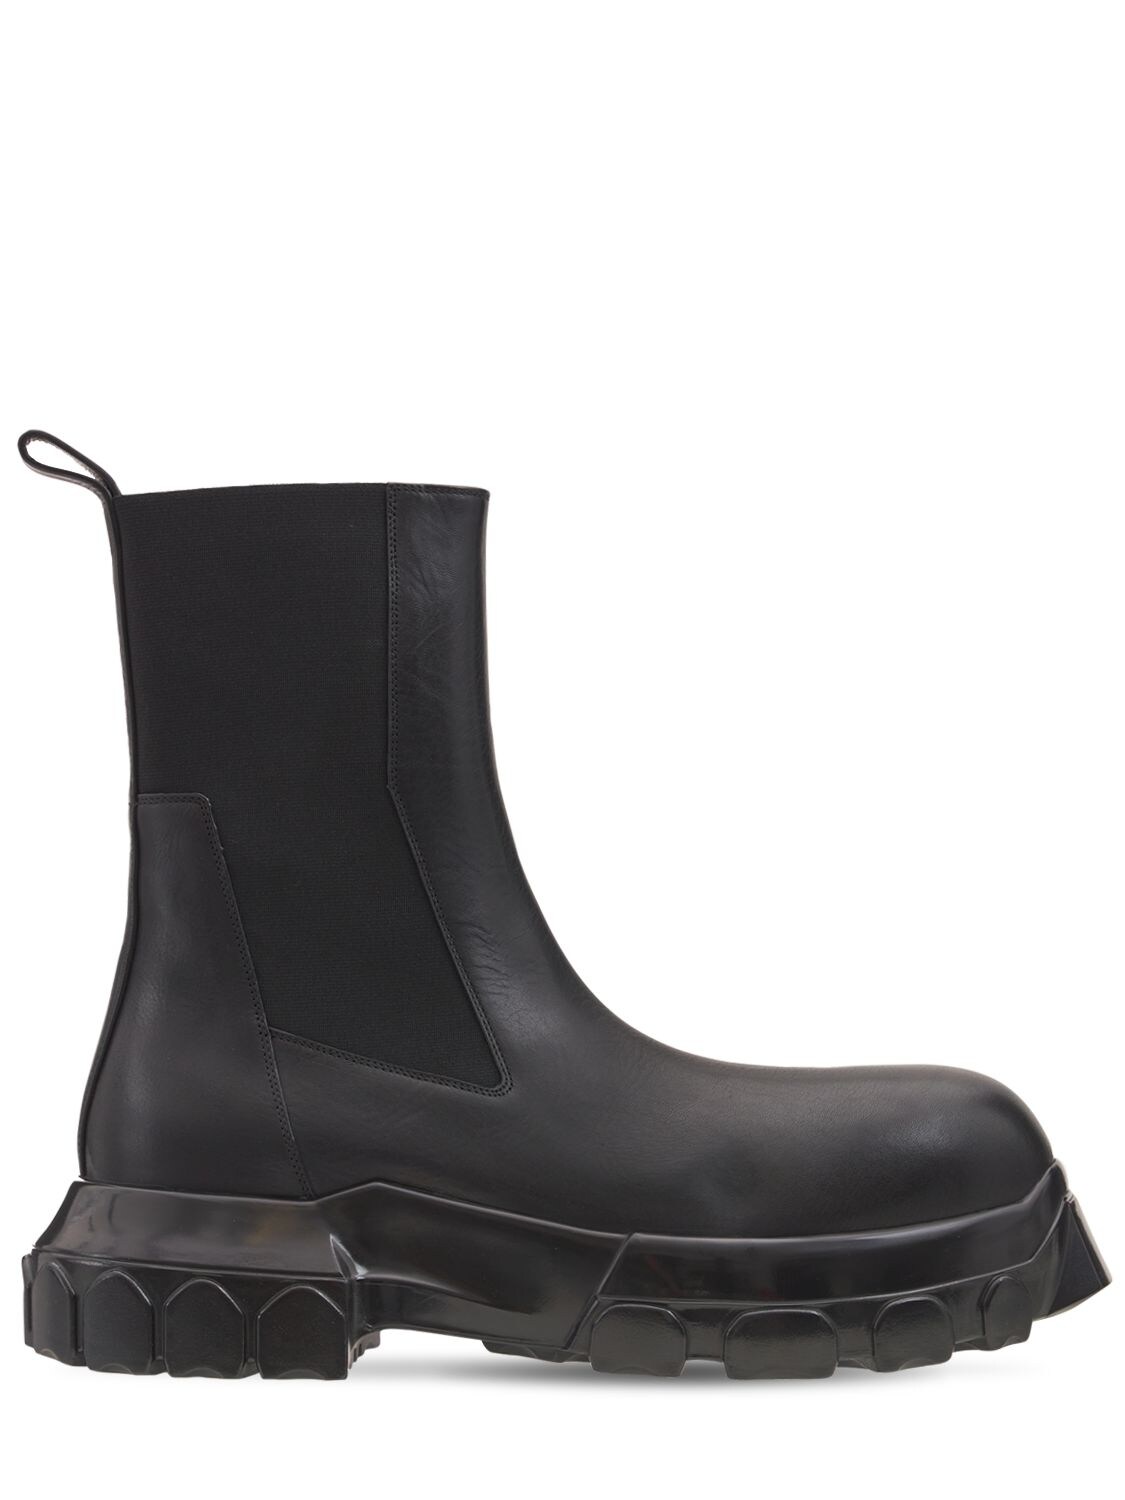 Beatle Bozo Tractor Leather Boots | Smart Closet